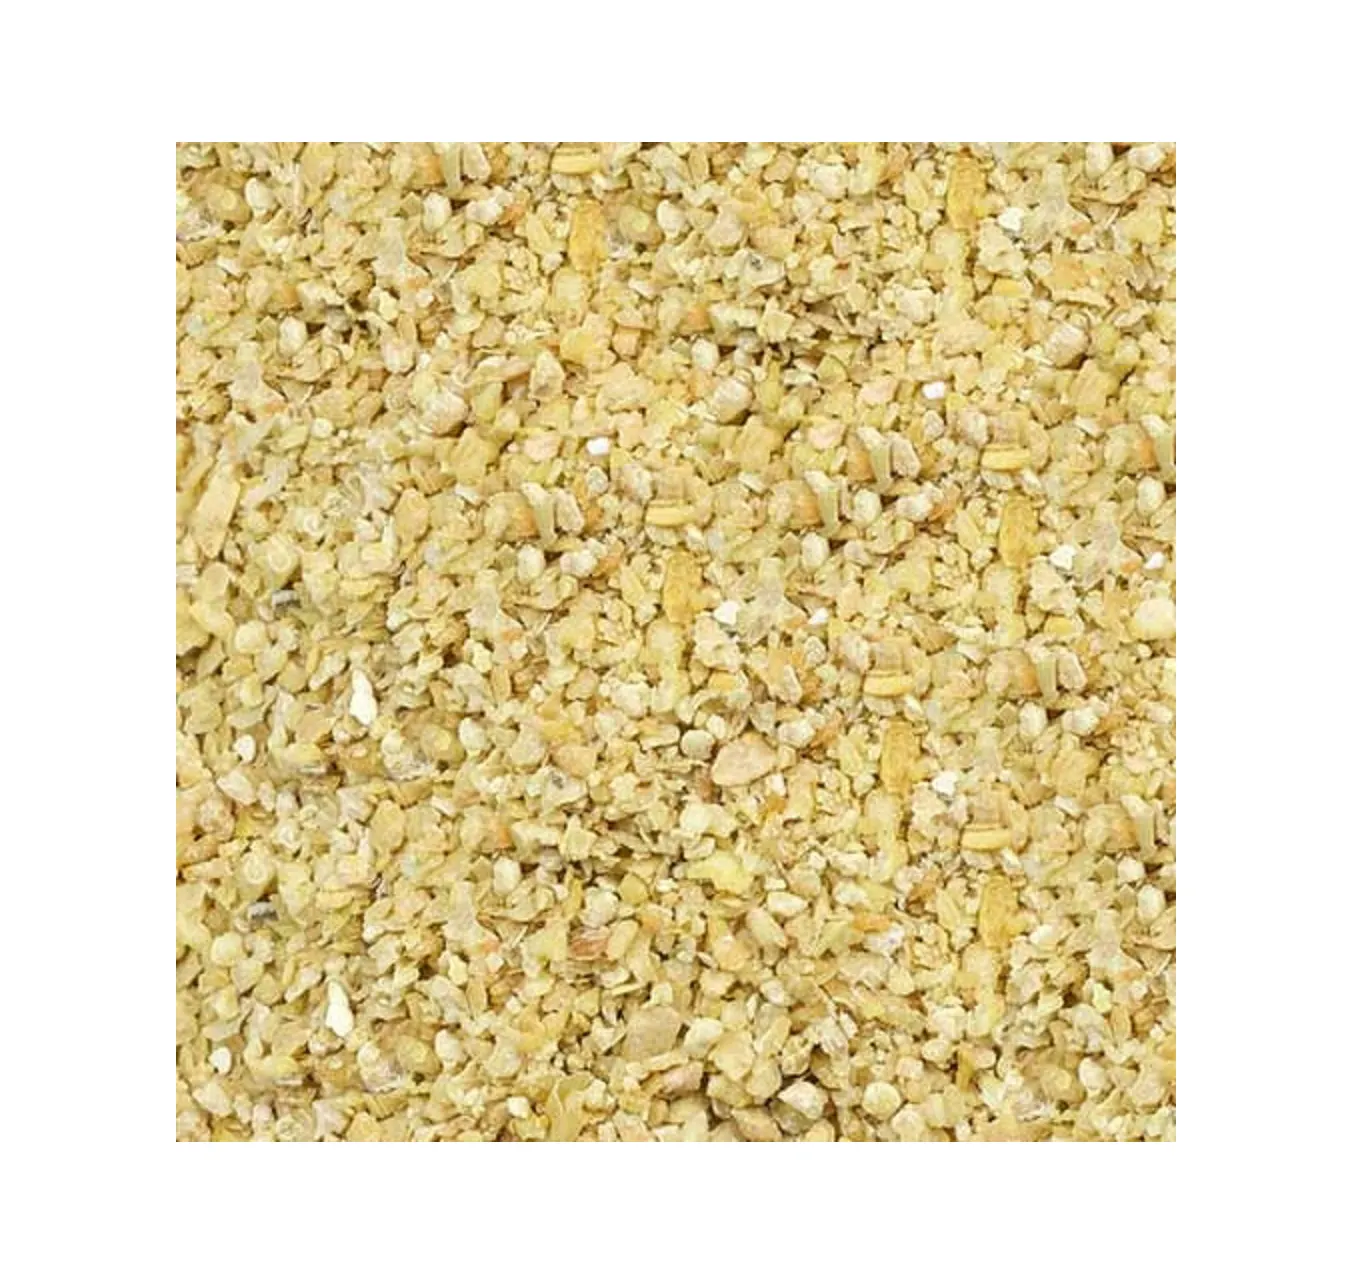 Feed 100% Natural Soyabean Meal Quality Animal Soybean Meal Top Grade